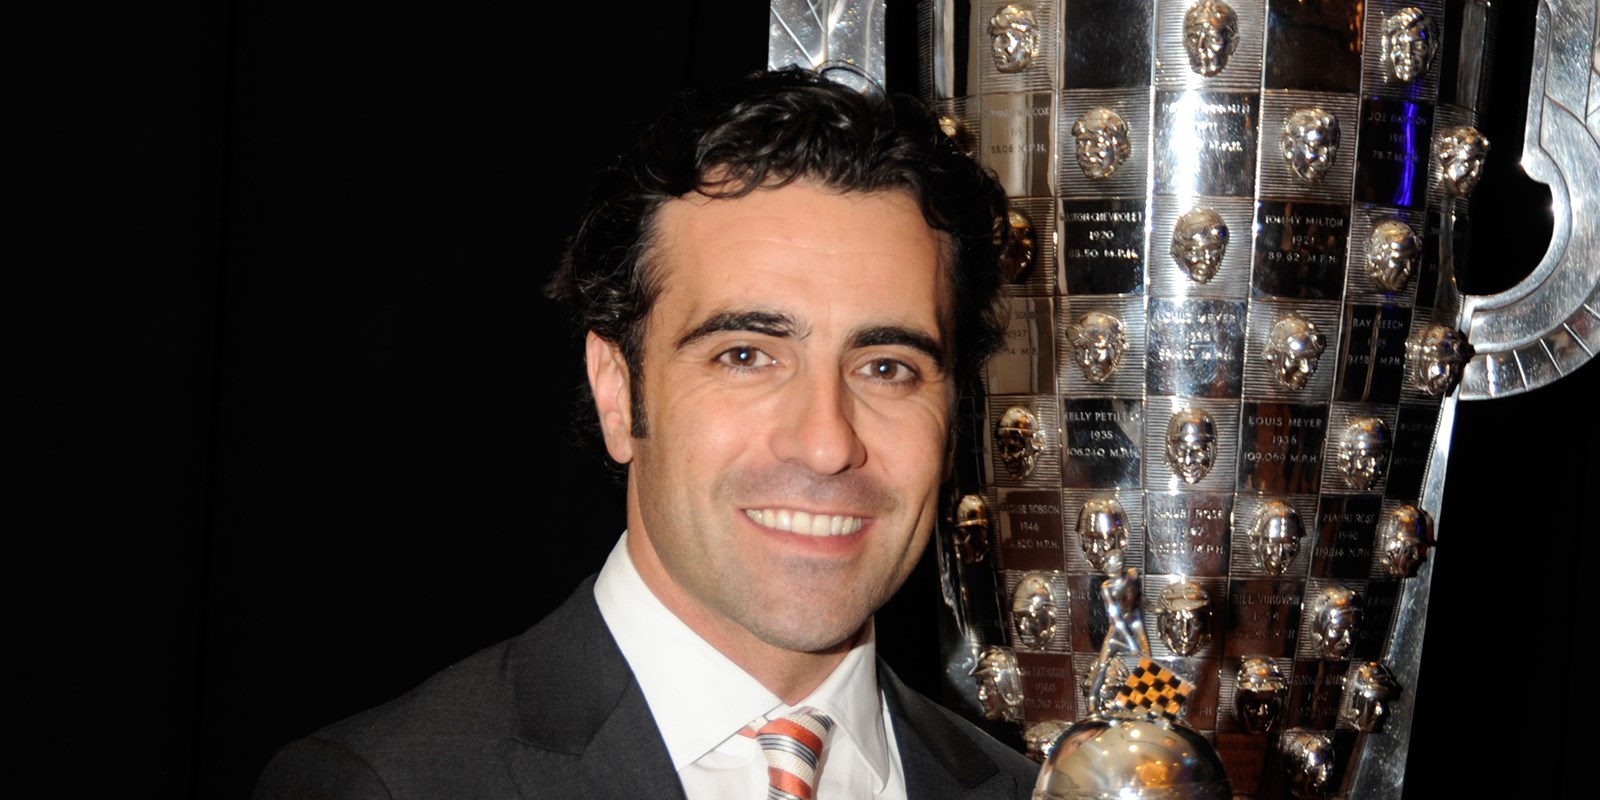 &#39;Baby Borg&#39; Trophy &#39;Means The Most,&#39; Franchitti Says